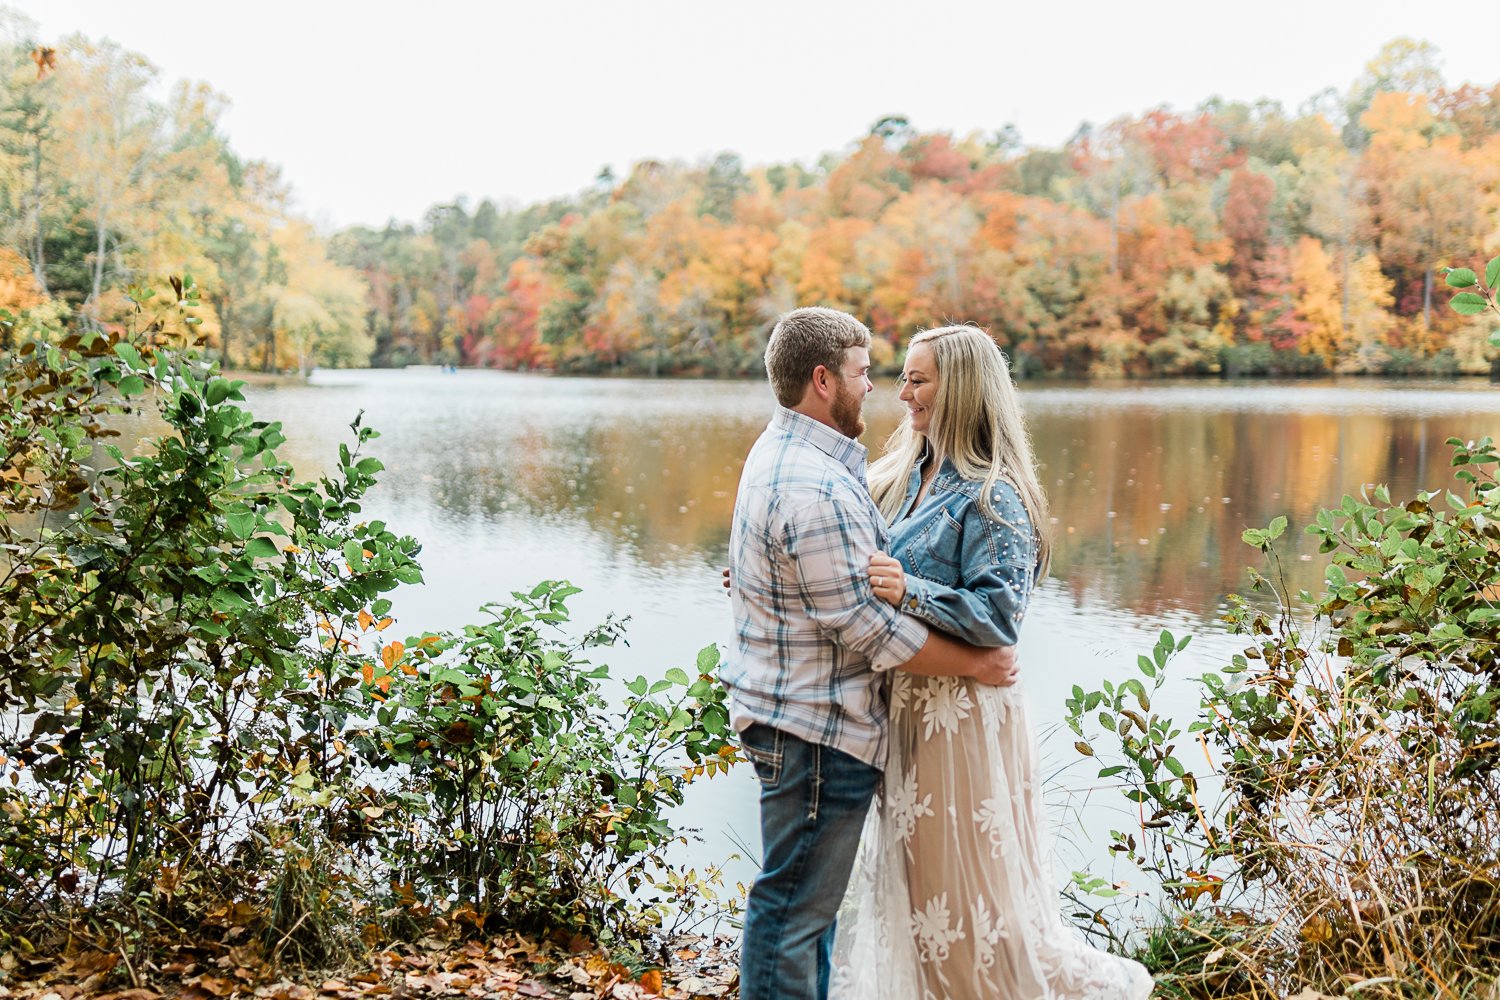 5 of the best places to take engagment photos in greenville sc-7-2.jpg